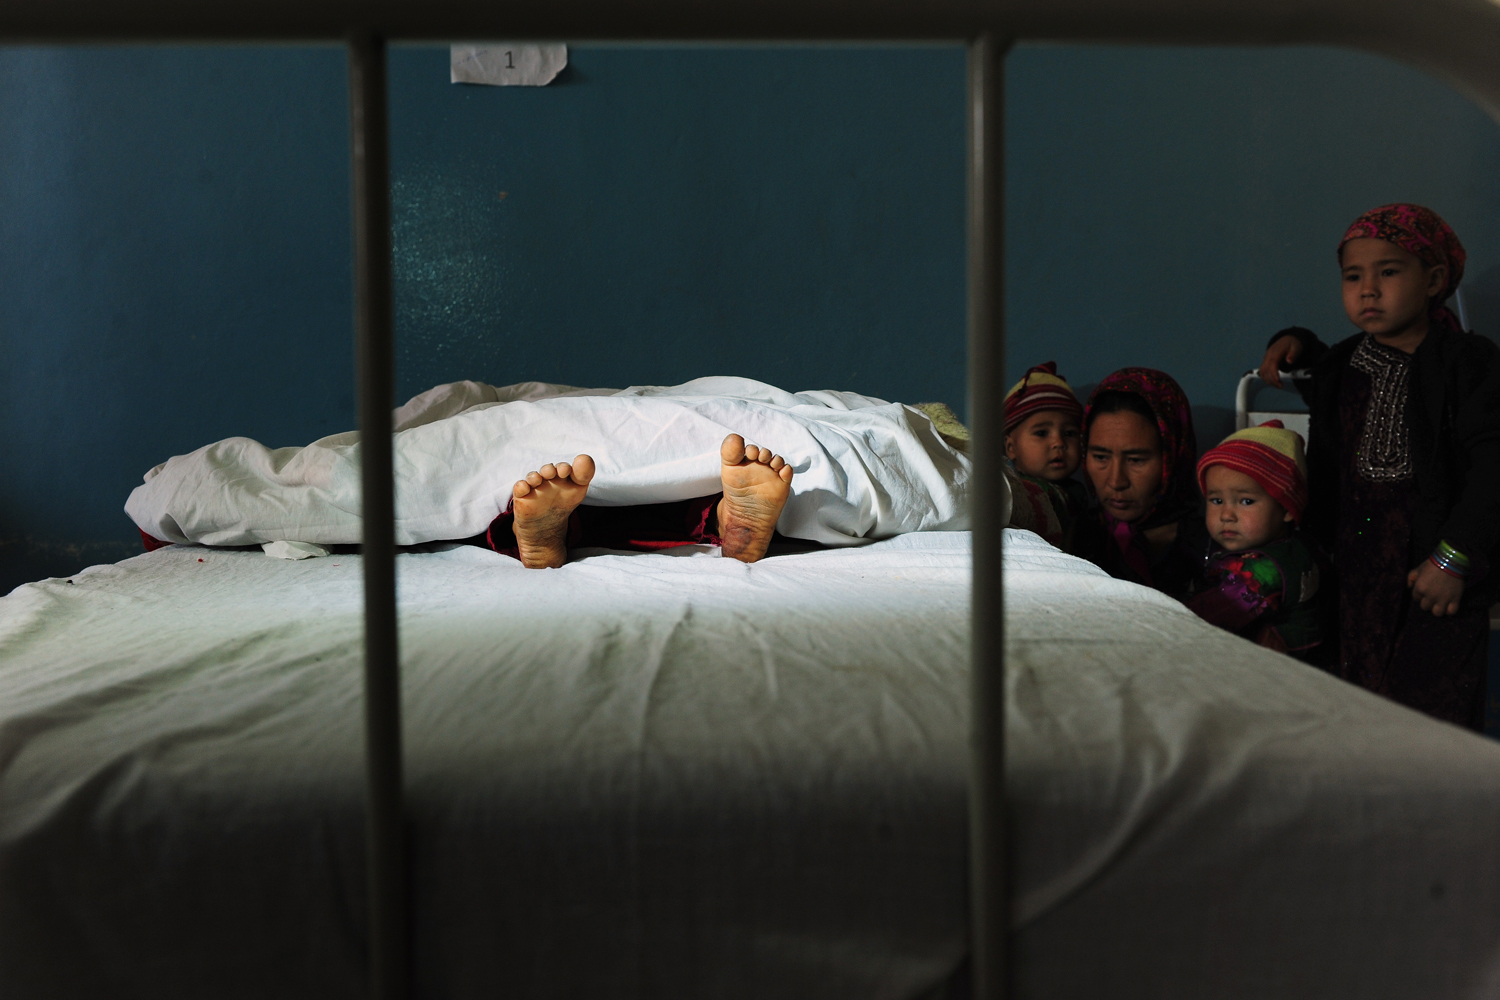 Image: Nov. 12, 2012. The family of a 5-year-old Afghan girl allegedly raped by a 22-year-old man, look on as she lies in a hospital bed in the Kaldar district of Balk Province, Mazar-i-Sharif.